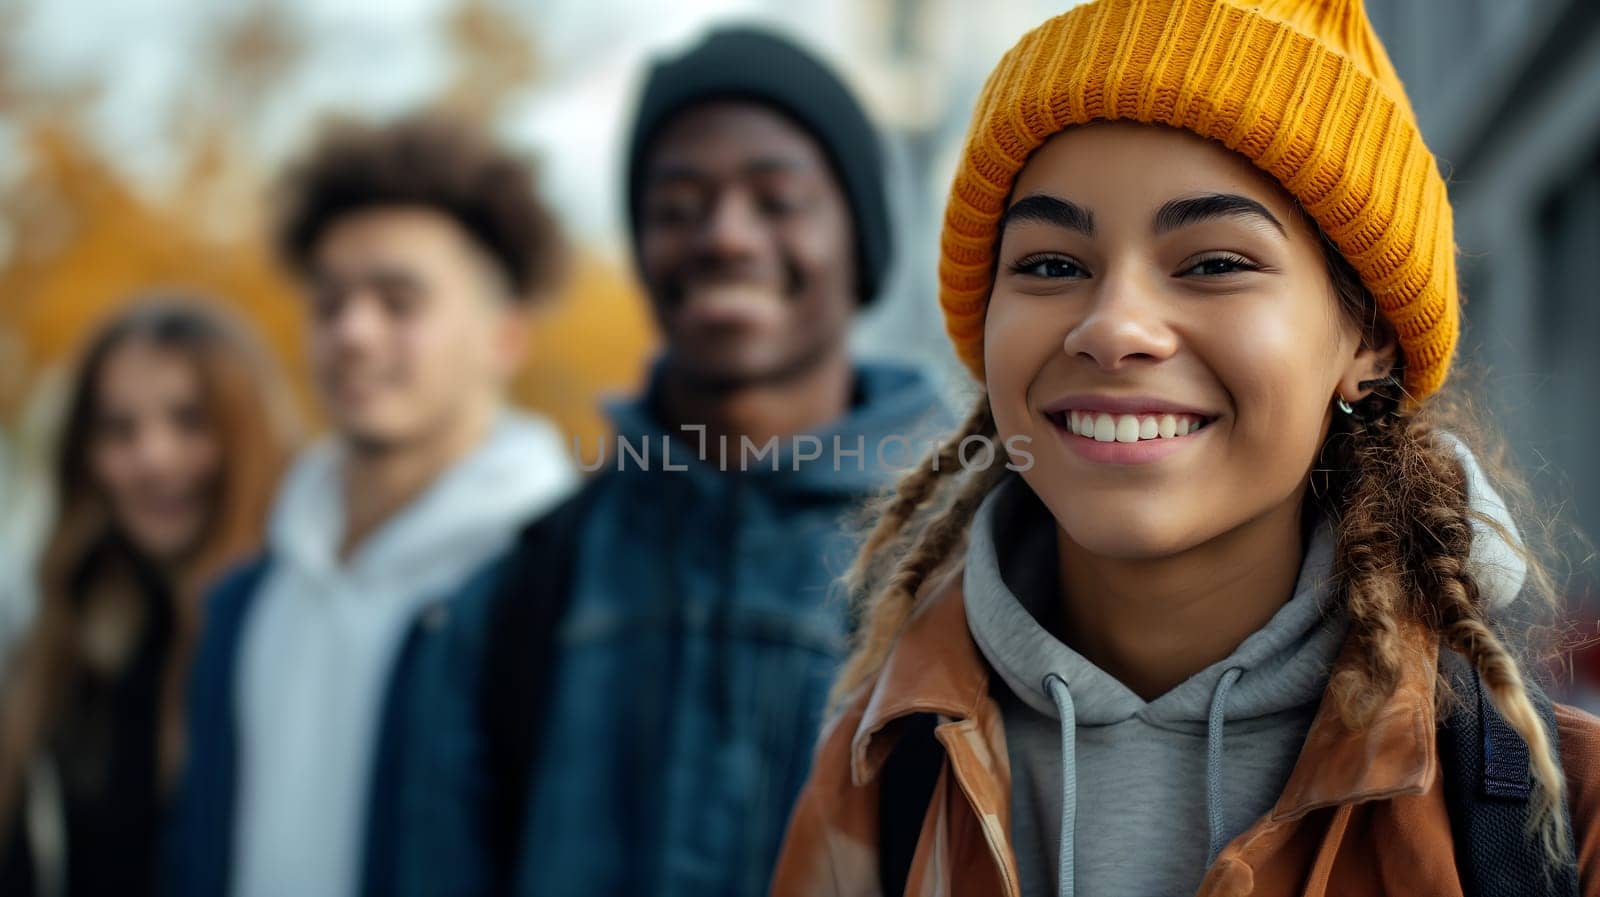 Smiling Young Woman in a Knit Hat Outdoors With Friends in Autumn by chrisroll